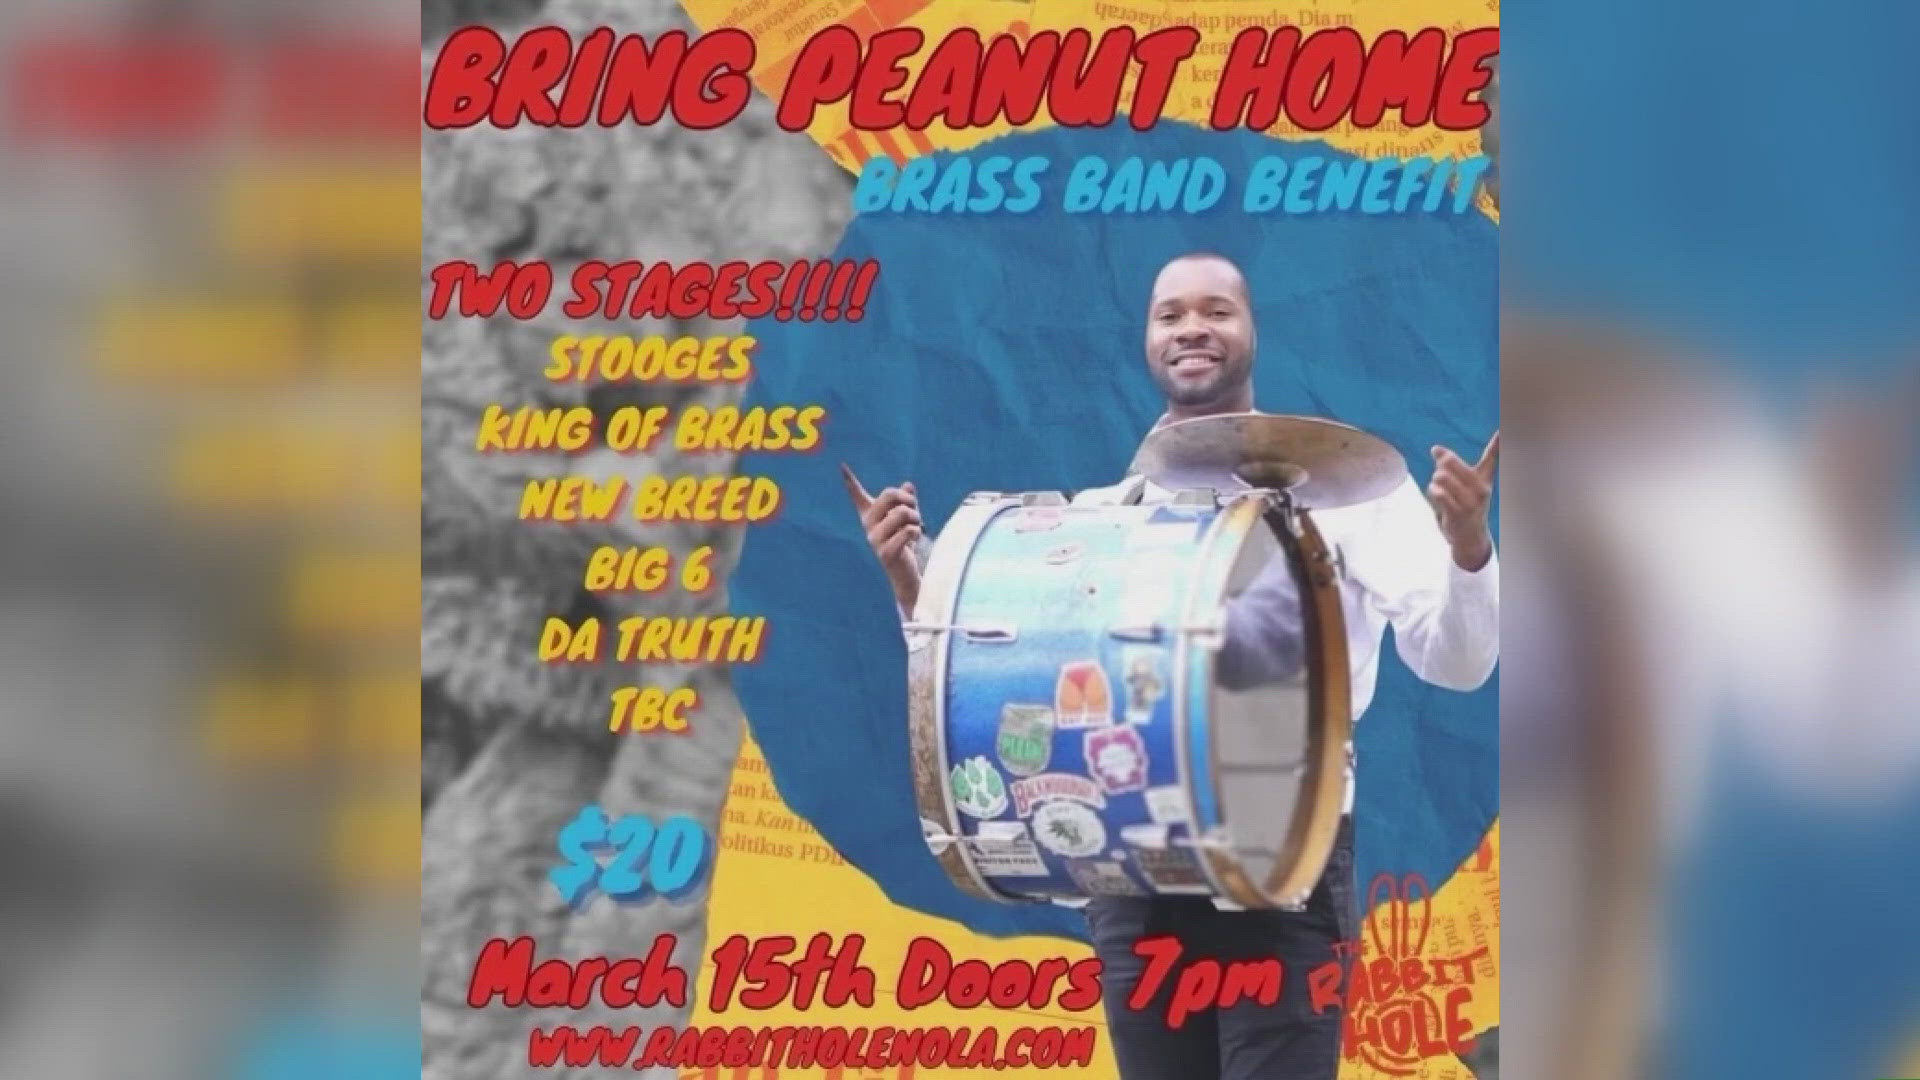 On Friday, March 15th, Ramsey, and several other bands are hosting a benefit concert to raise money to hire an attorney that can help get Thaddeus Ramsey home.